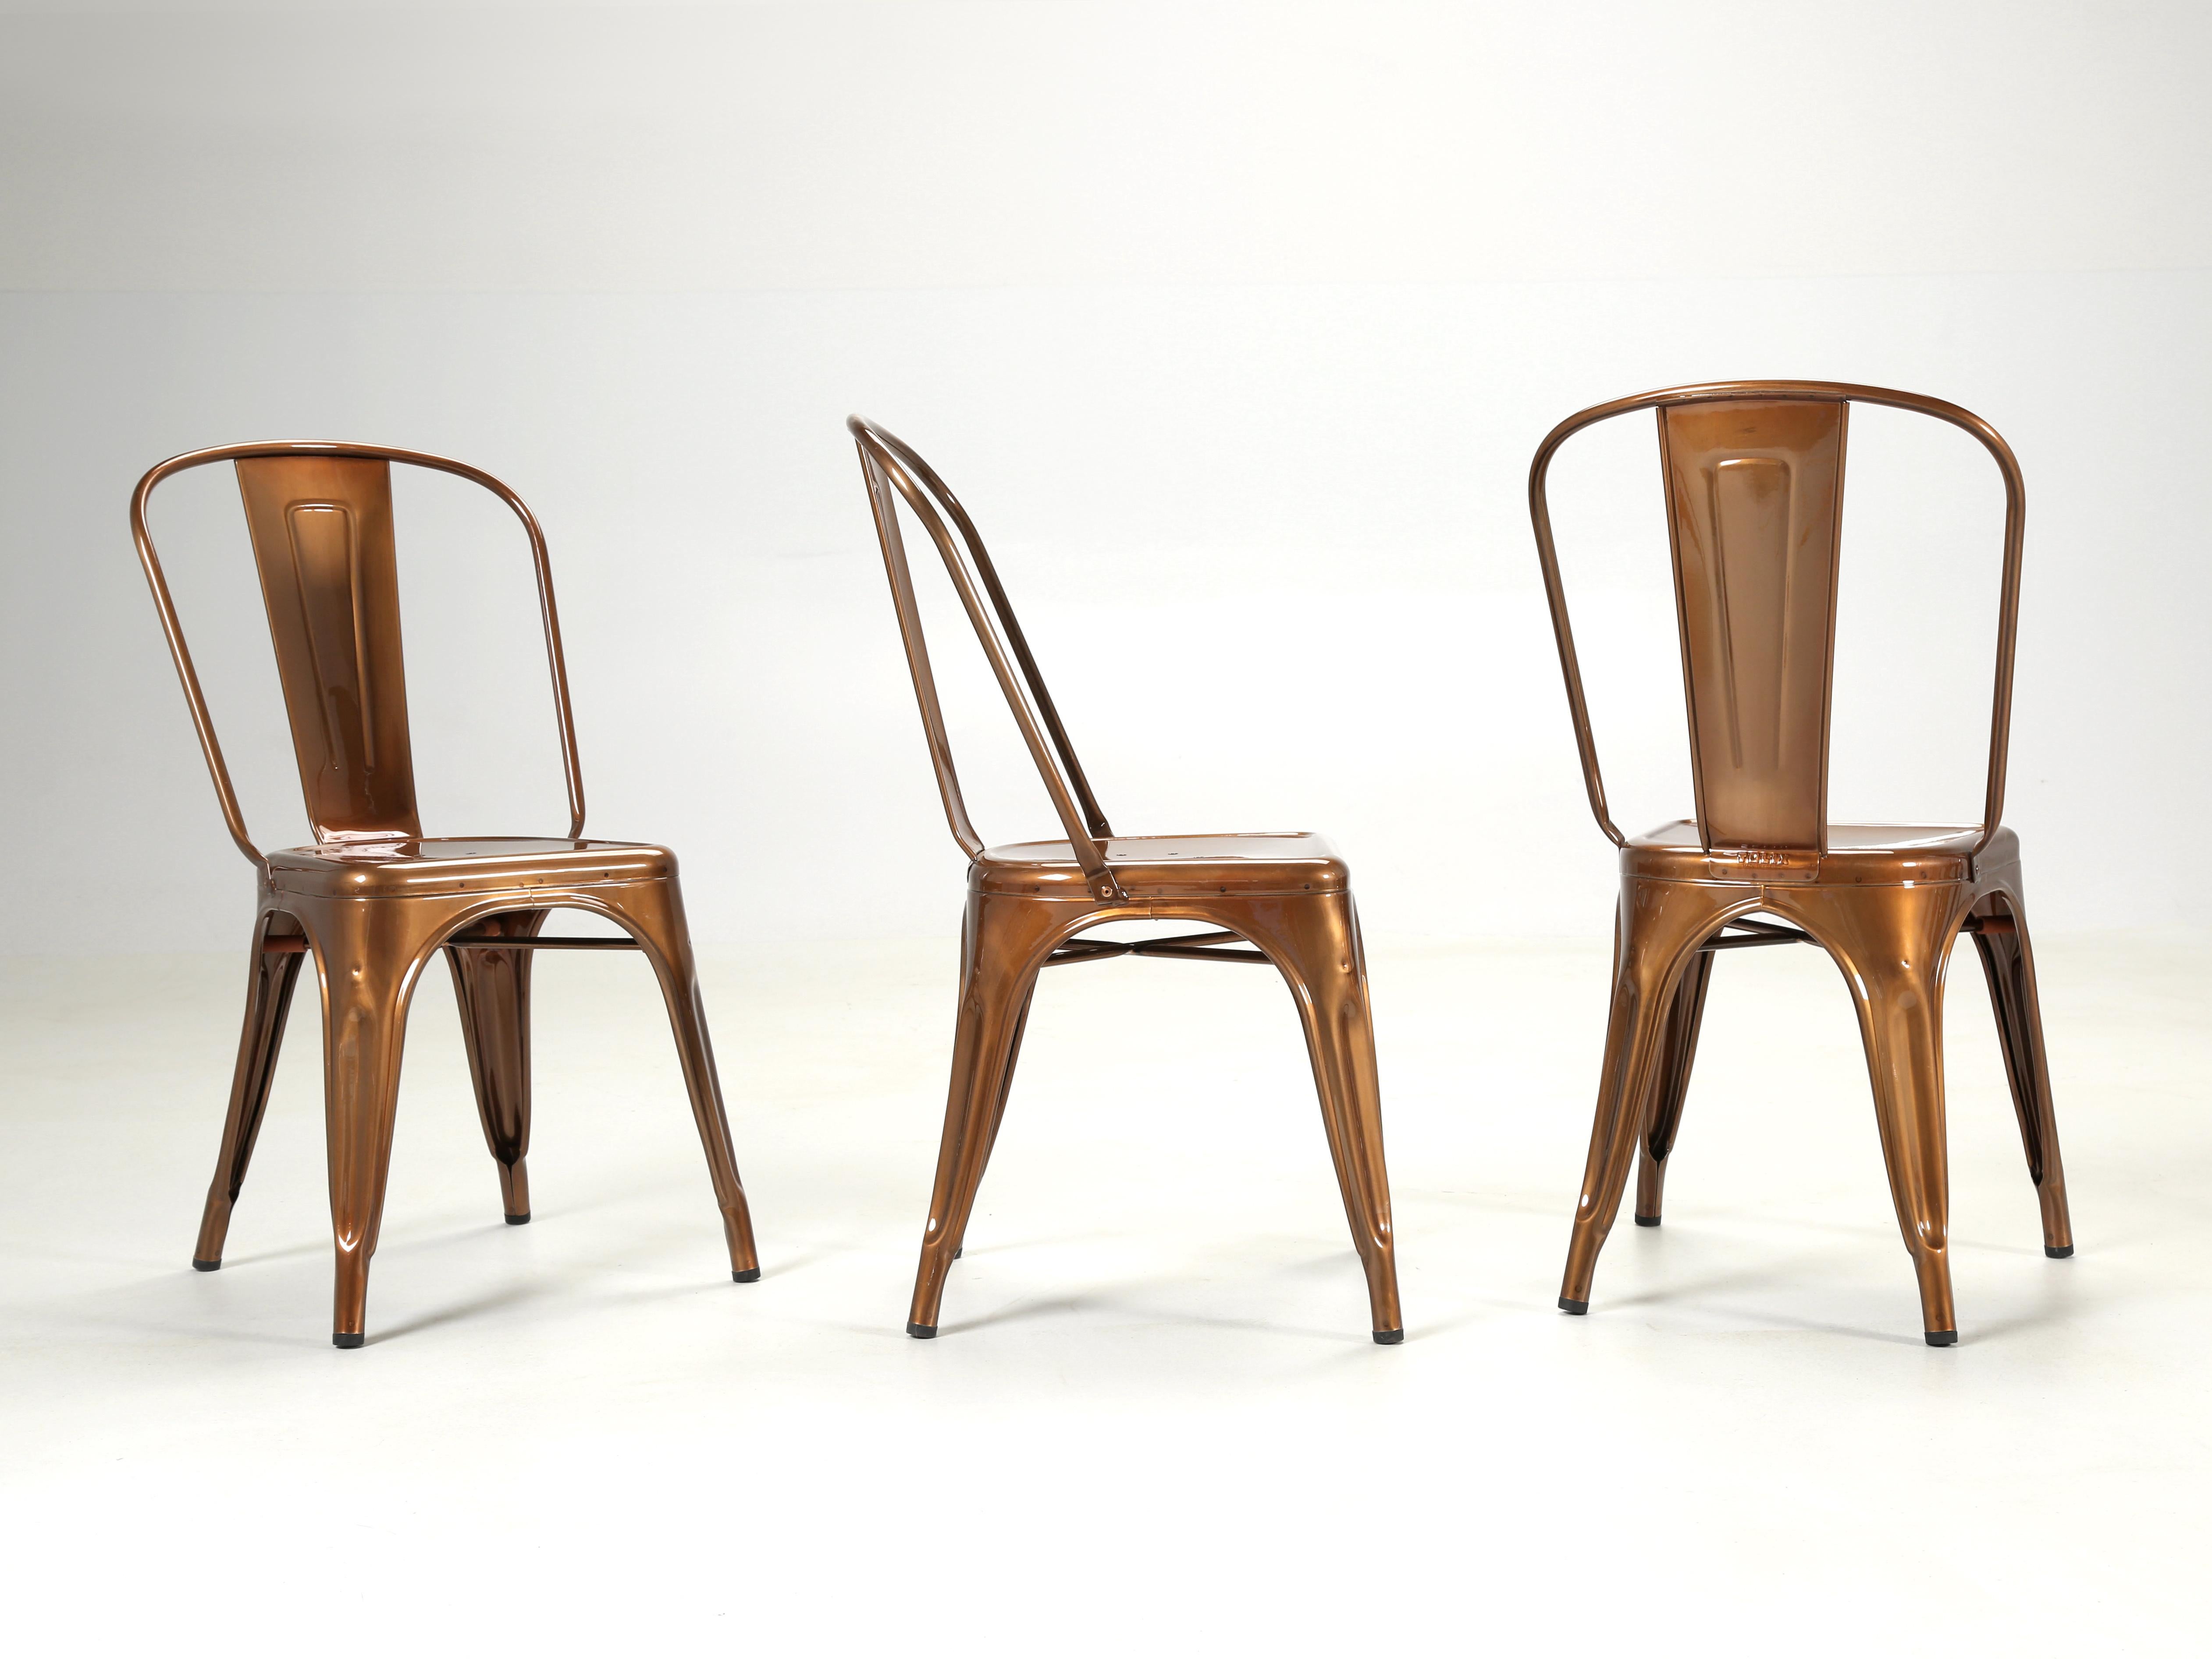 Hand-Crafted Authentic French Tolix Steel Stacking Chairs, Showroom Samples 100's Available